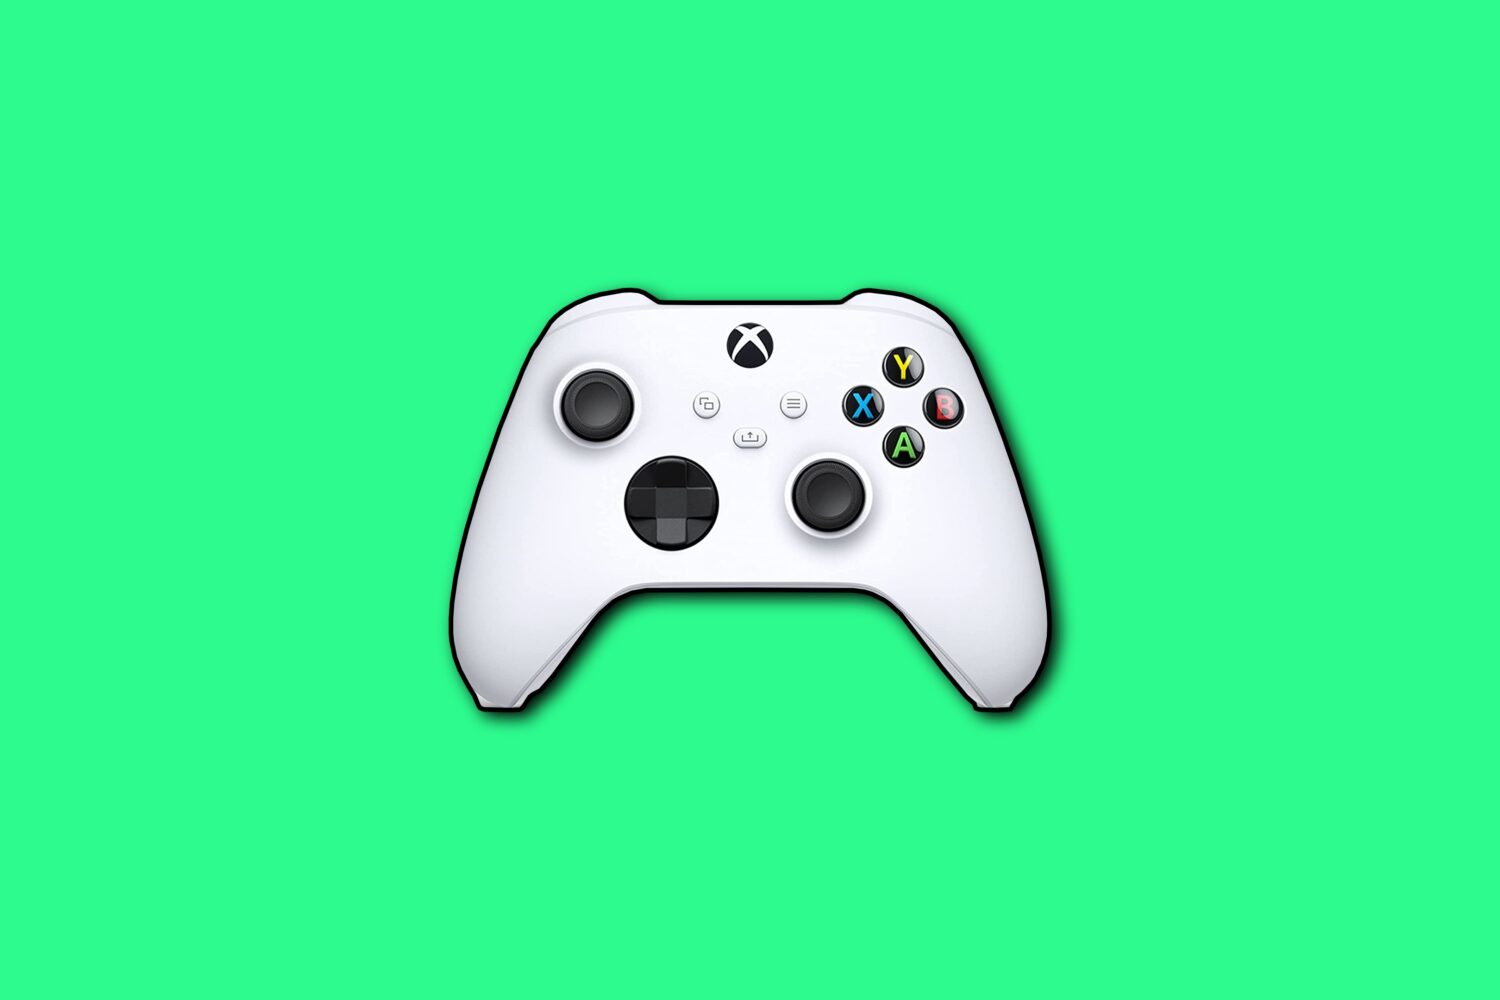 Xbox controller set agains a solid pastel green background